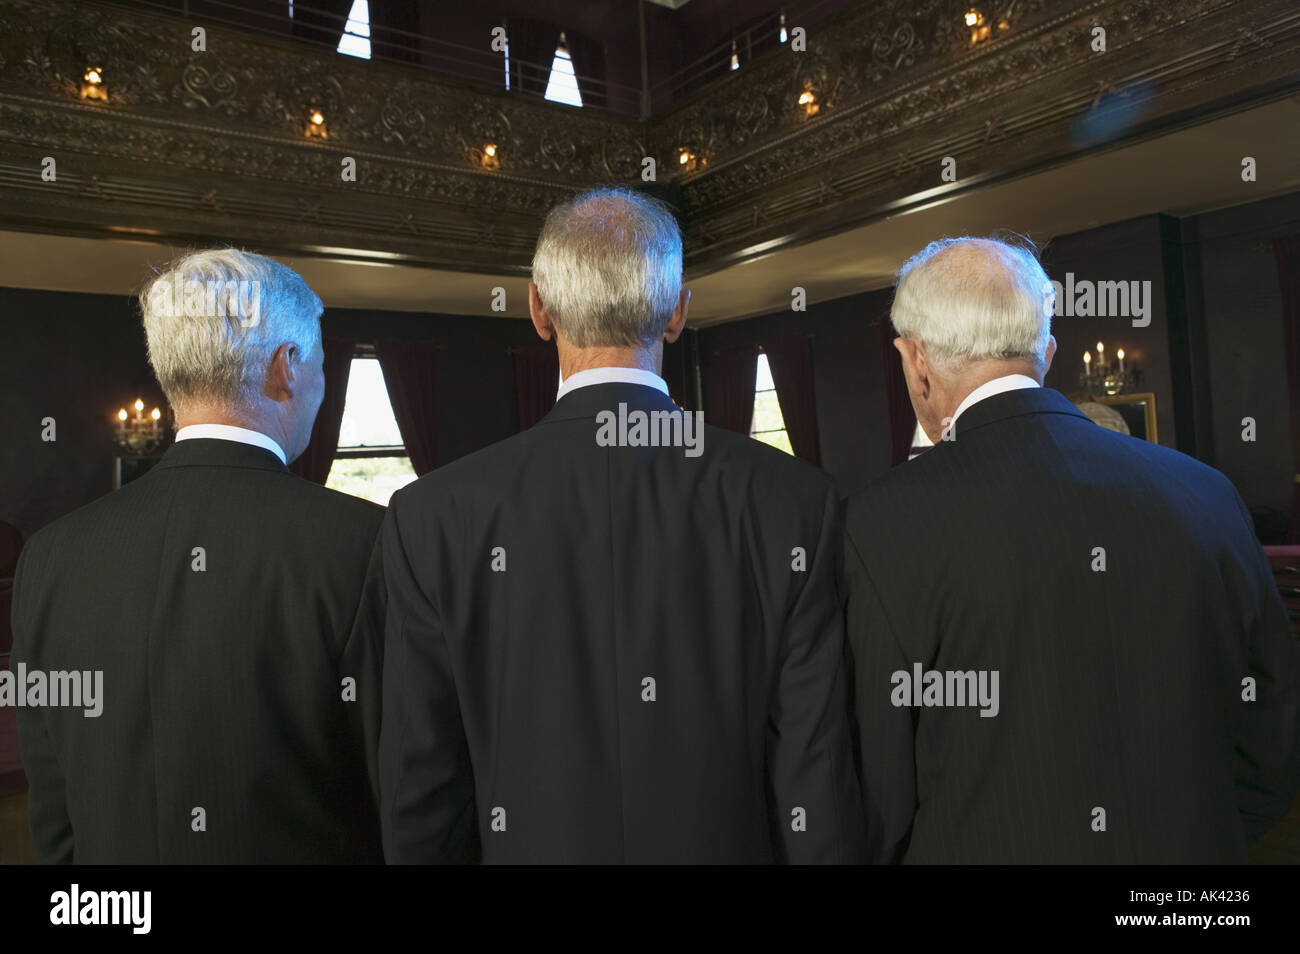 Rear view of three senior men in a dance hall Stock Photo